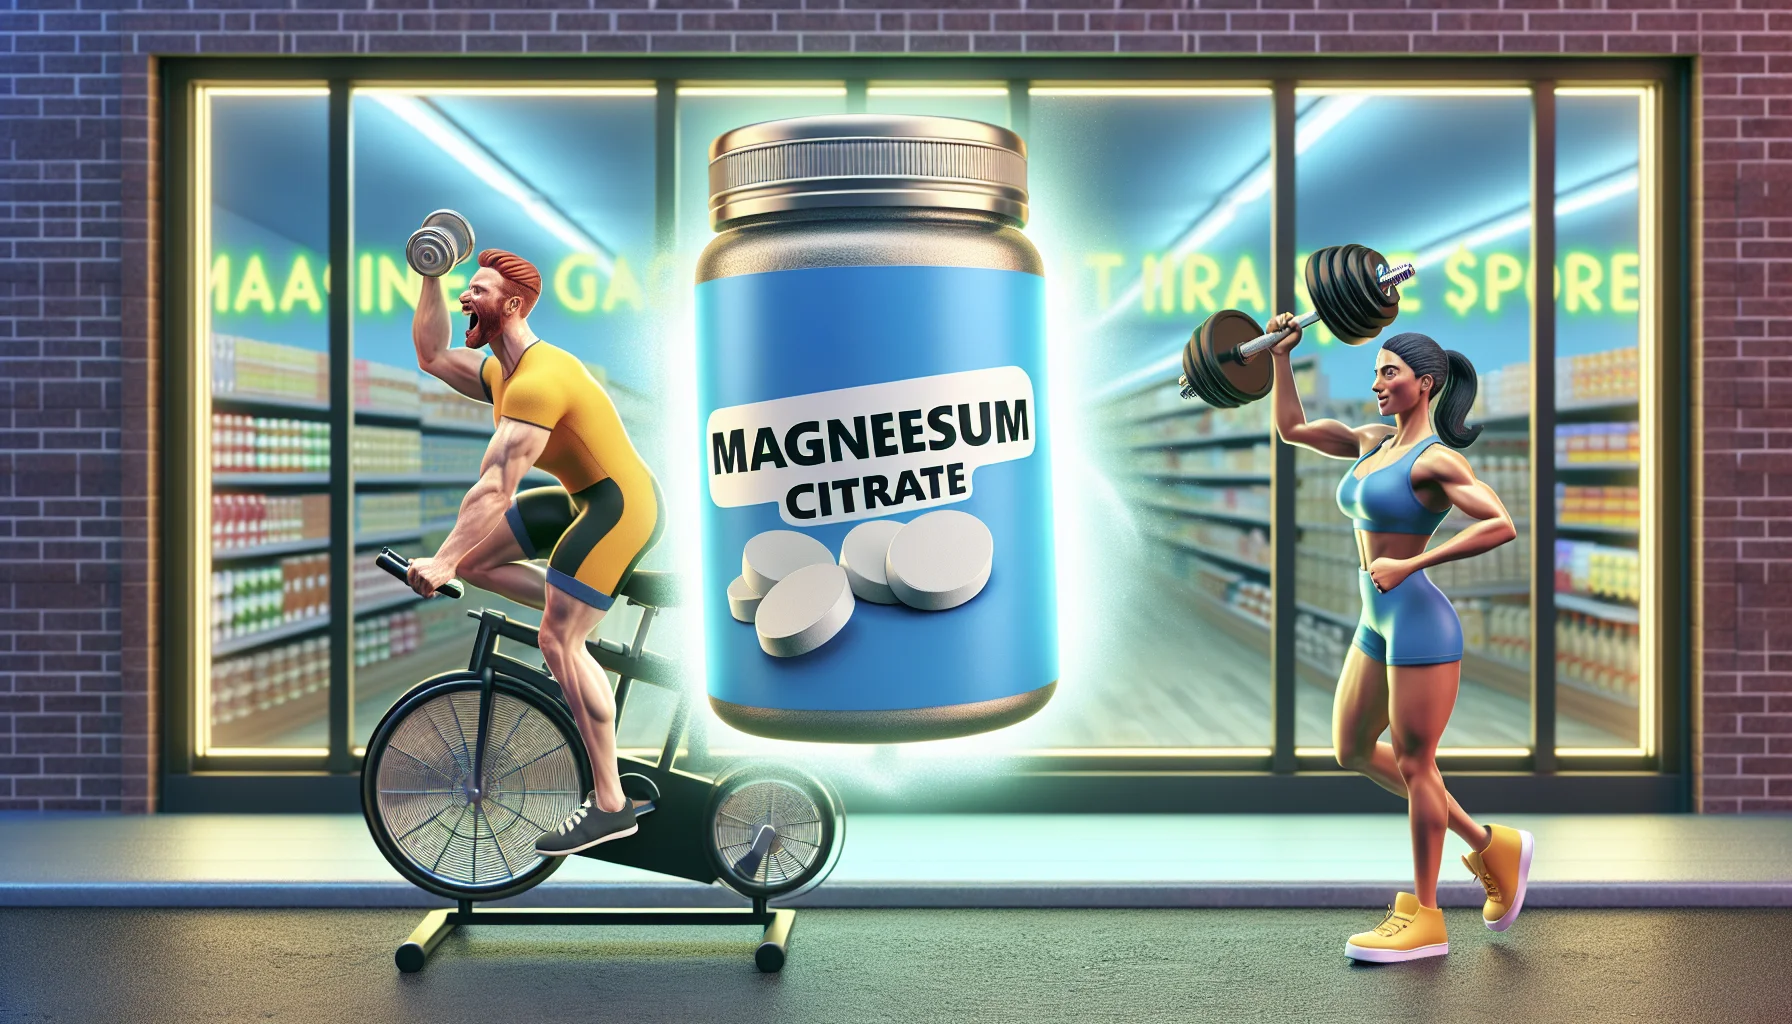 Imagine an amusing scene displaying a container of Magnesium Citrate. The container is situated in a retail setting, referencing the general style of dollar stores. In the scenario, two animated figures are depicted. The first one, a Caucasian male cyclist, is energetically pedaling on a stationary bike, powering a neon sign that illuminates the name 'Magnesium Citrate'. The other, a Middle-Eastern female bodybuilder, holding a barbell in one hand while pointing towards the Magnesium Citrate container with the other. The image underlines the idea of using health supplements for boosting athletic performance.